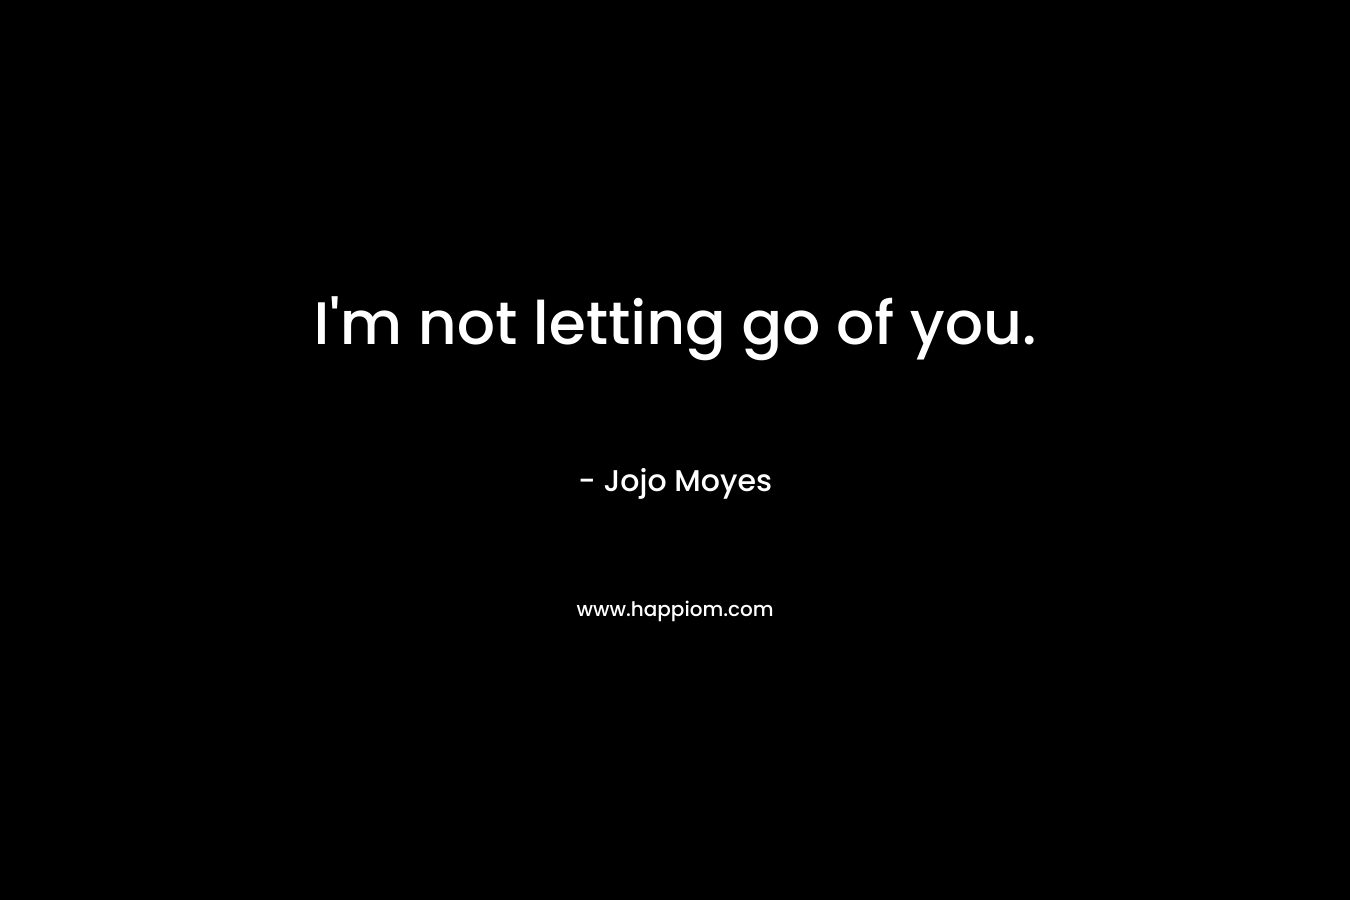 I'm not letting go of you.